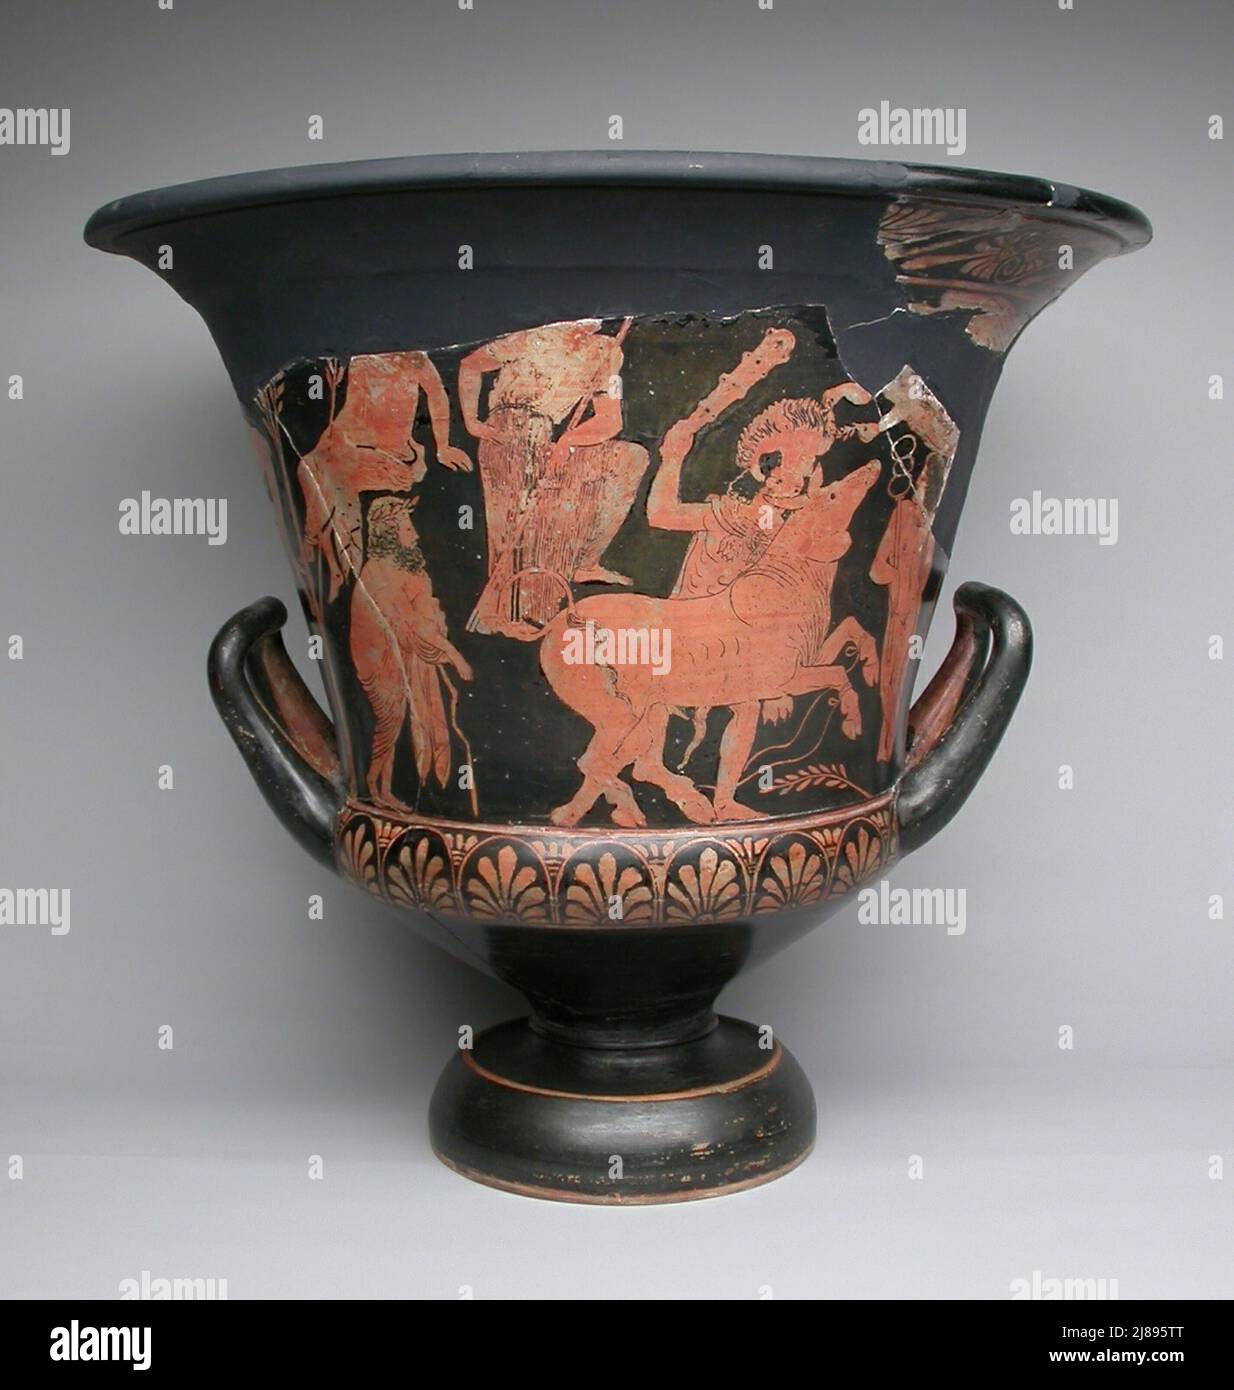 Calyx Krater (Mixing Bowl), about 400-380 BCE. Stock Photo